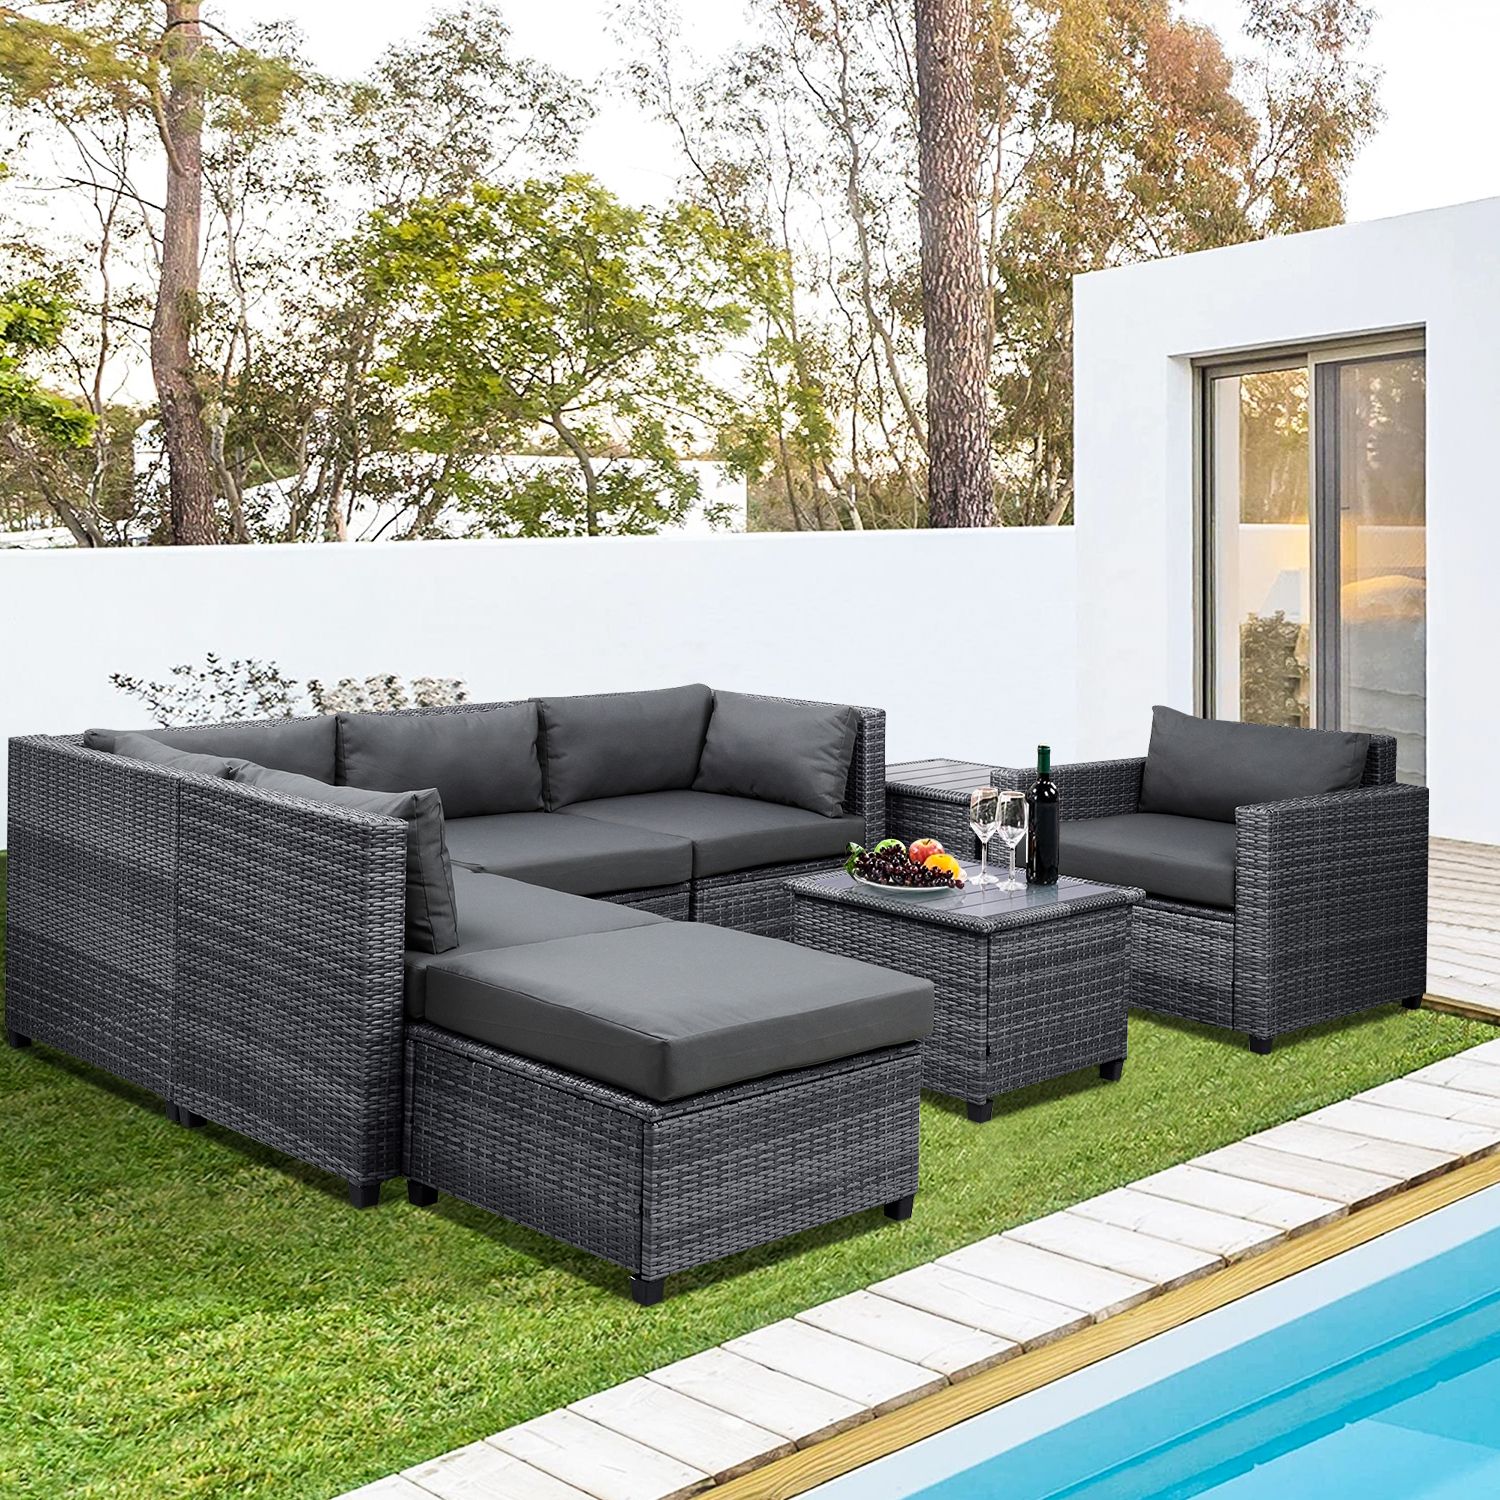 Gray All Weather Outdoor Seating Patio Sets With Favorite Sectional Patio Chairs & Seating Sofa Furniture For Living Room Outdoor (View 8 of 15)